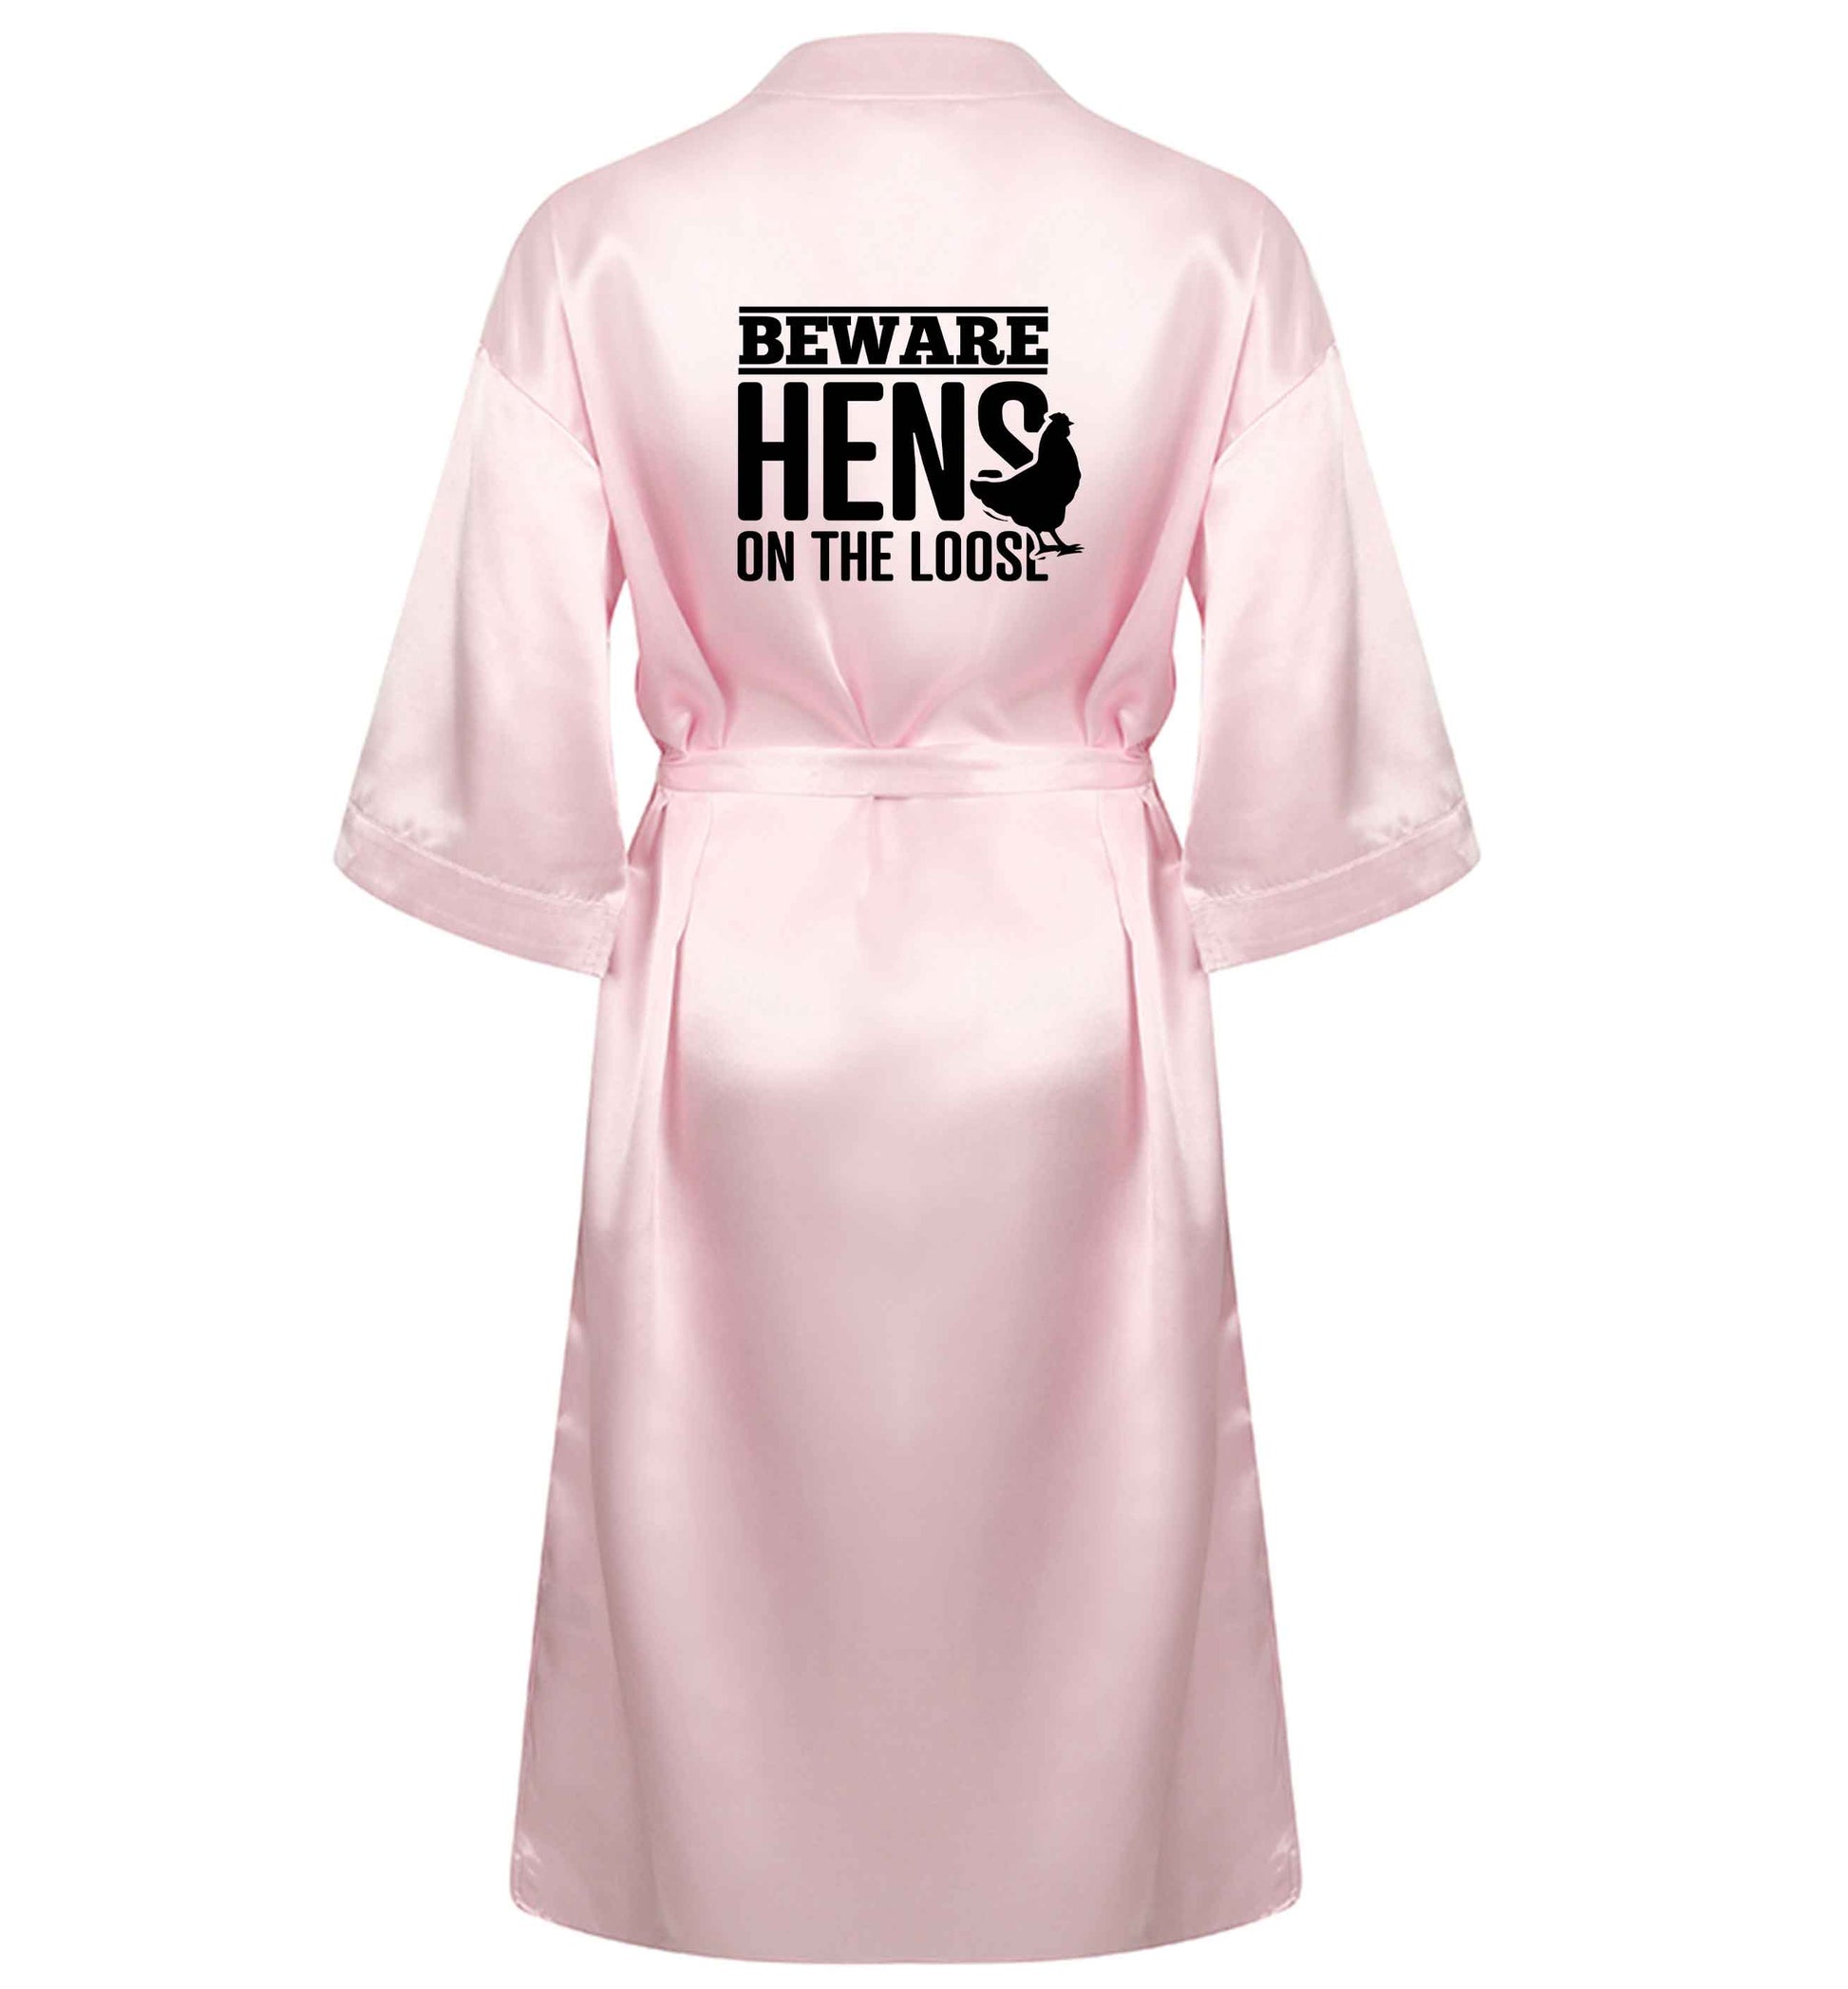 Beware hens on the loose XL/XXL pink  ladies dressing gown size 16/18